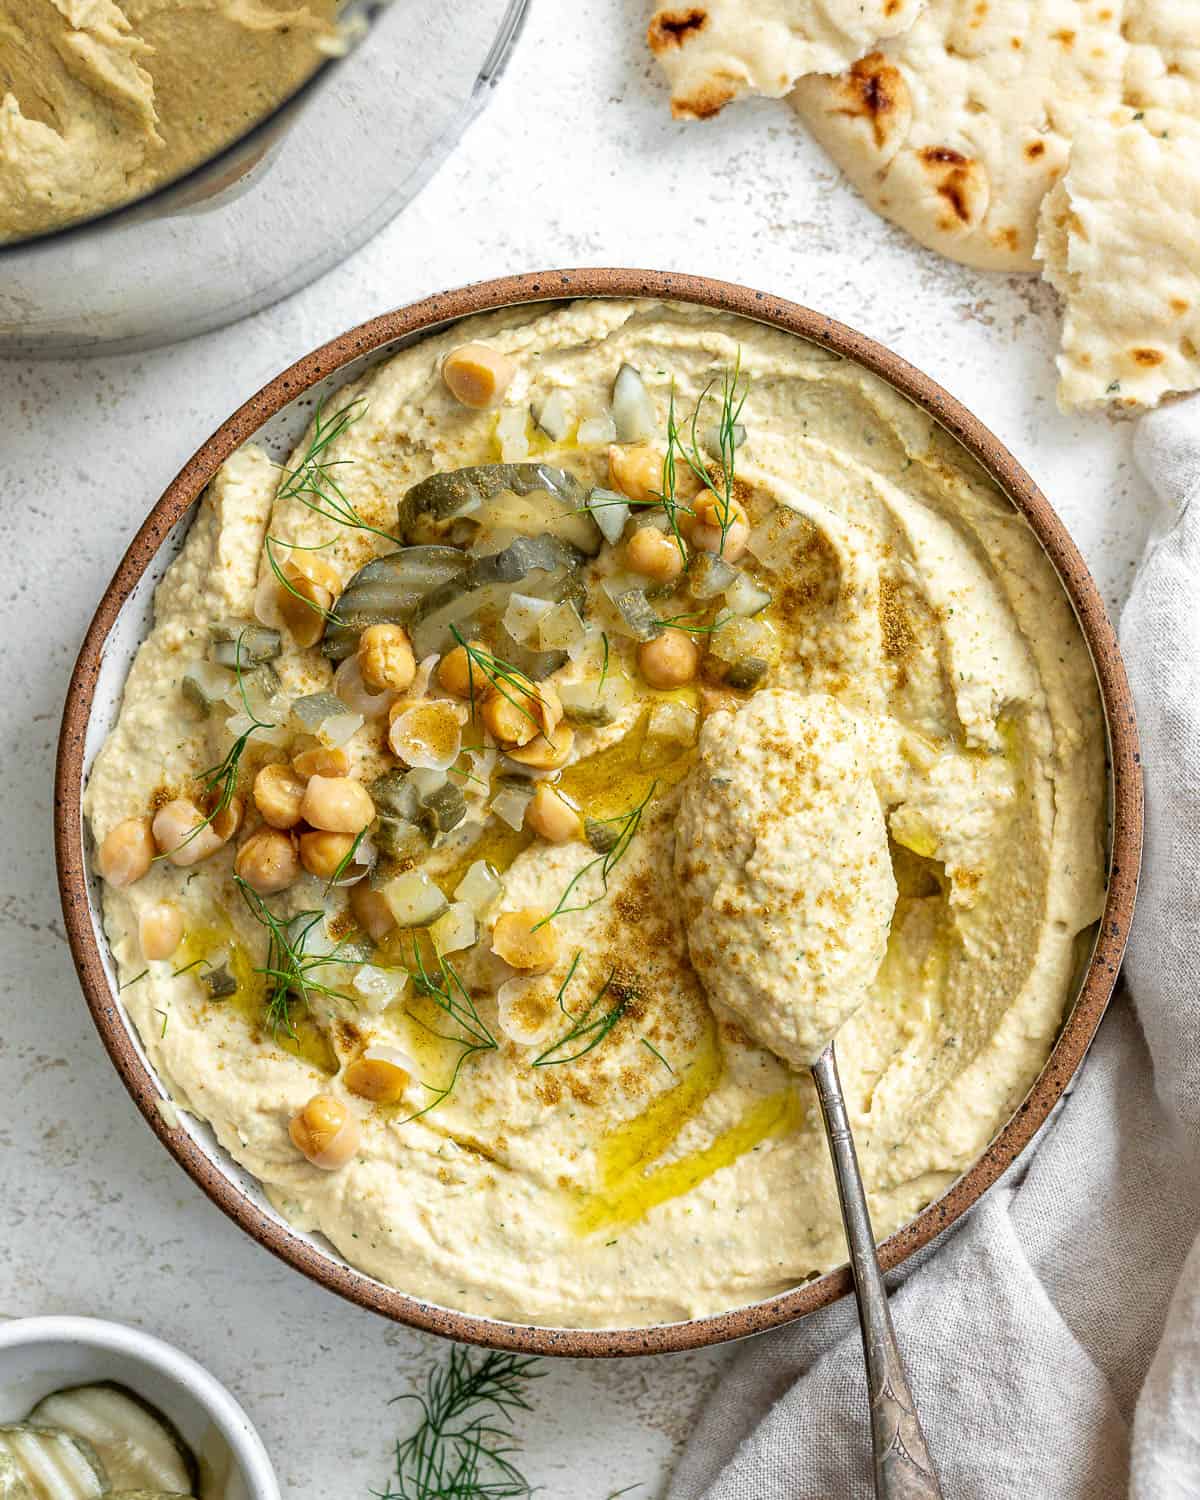 completed Dill Pickle Hummus a،nst a white background